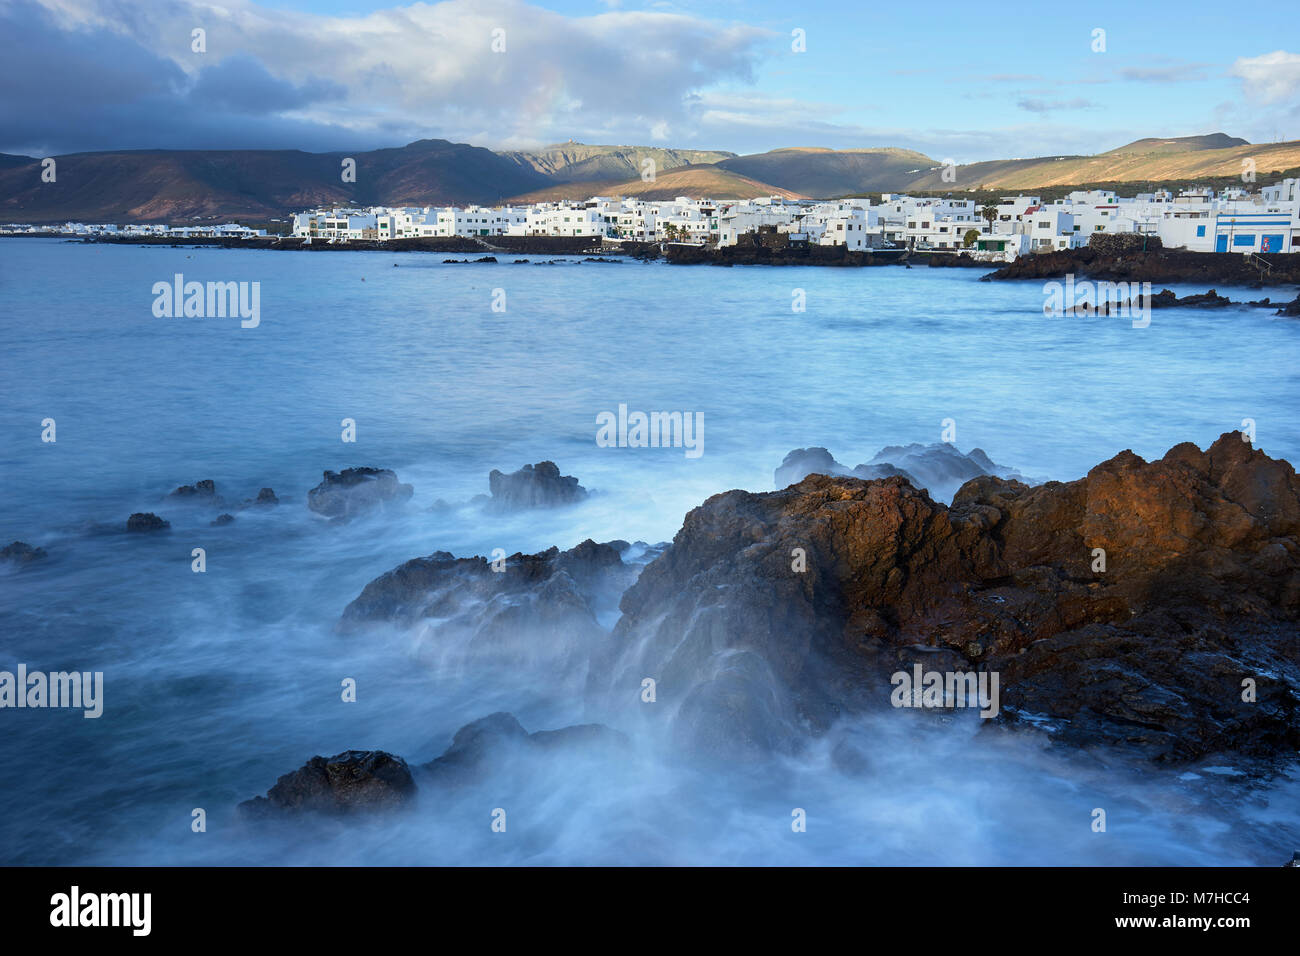 Village of Punte Mujeres on the coast of Lanzarote, Canary Islands, Spain.  Long exposure Stock Photo